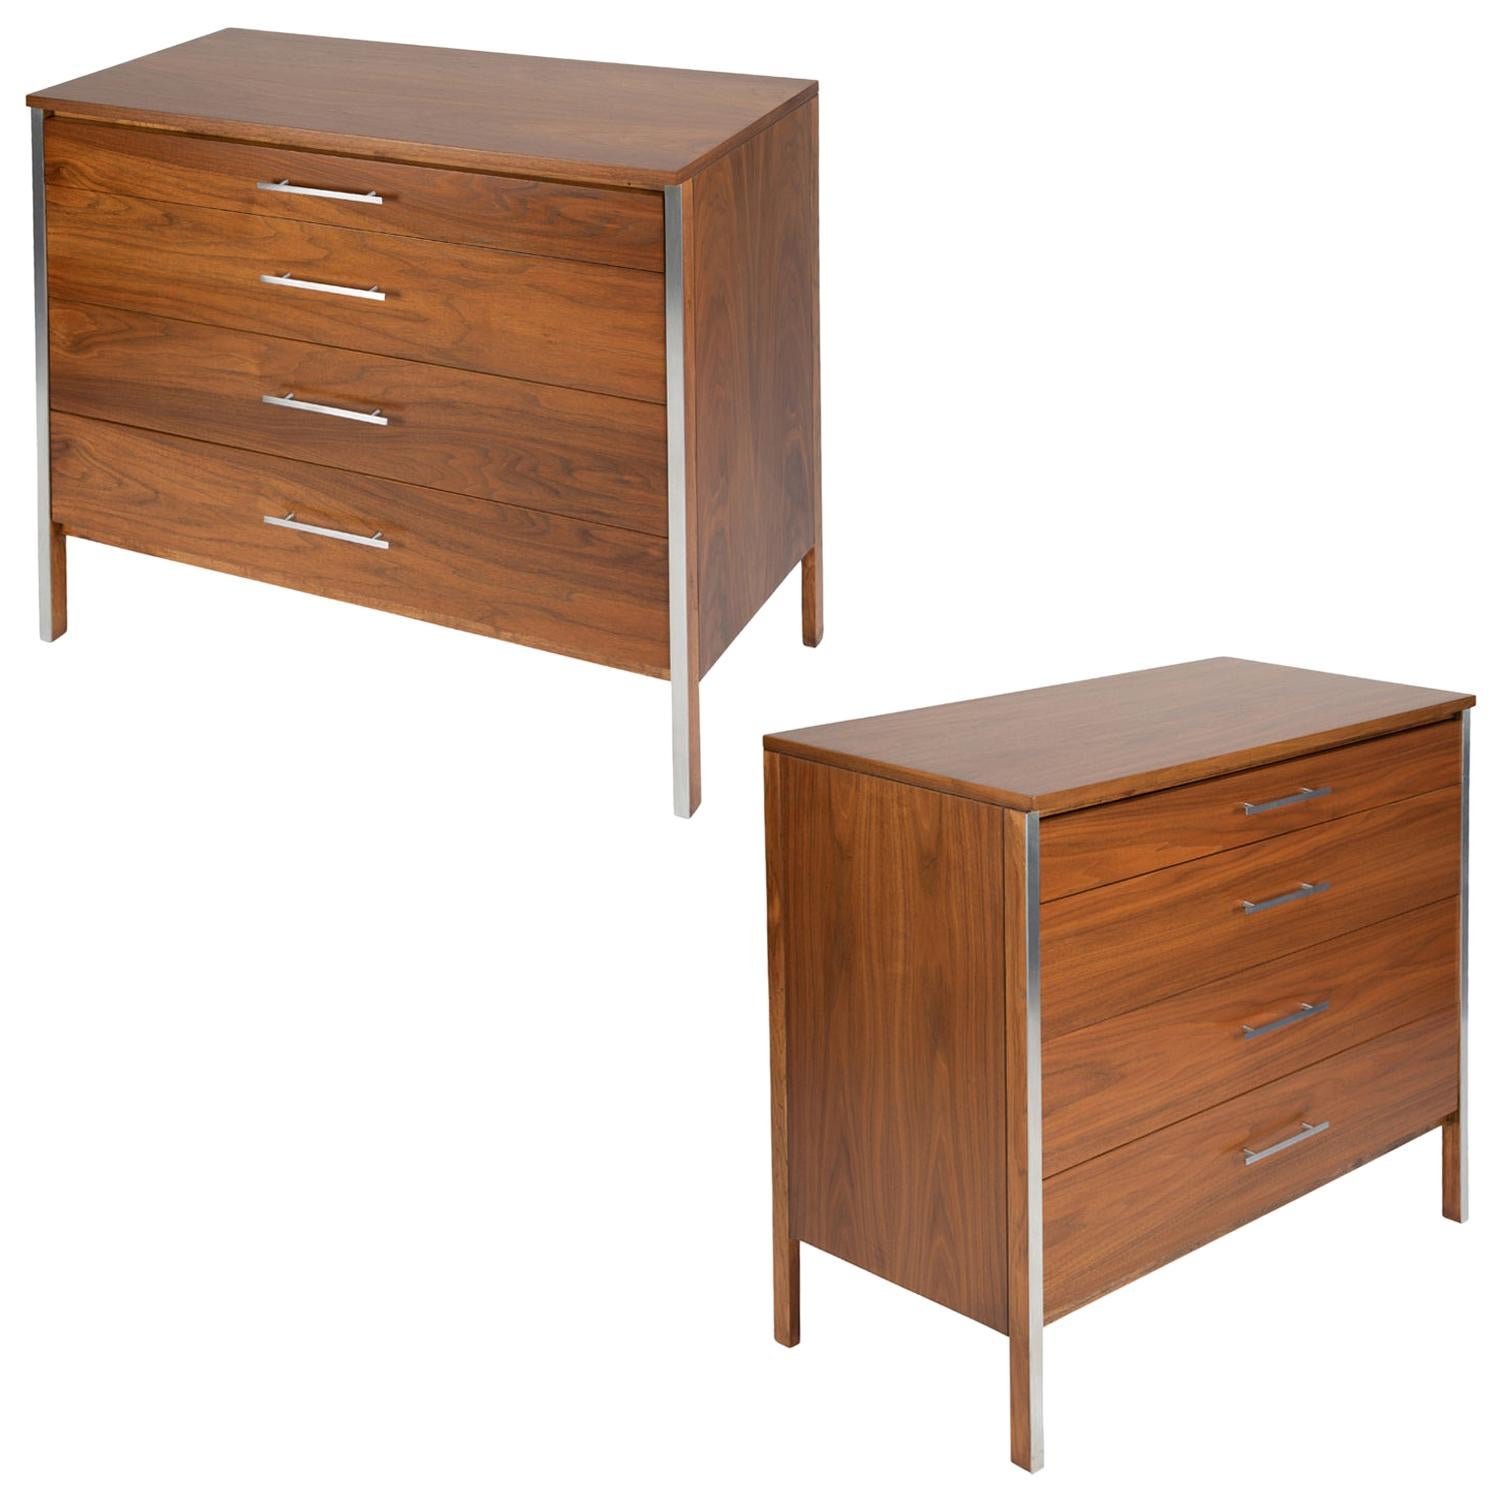 Pair White Slim 2 Drawer Bedside Chest Bedroom Hammered Furniture Chic Repousse 